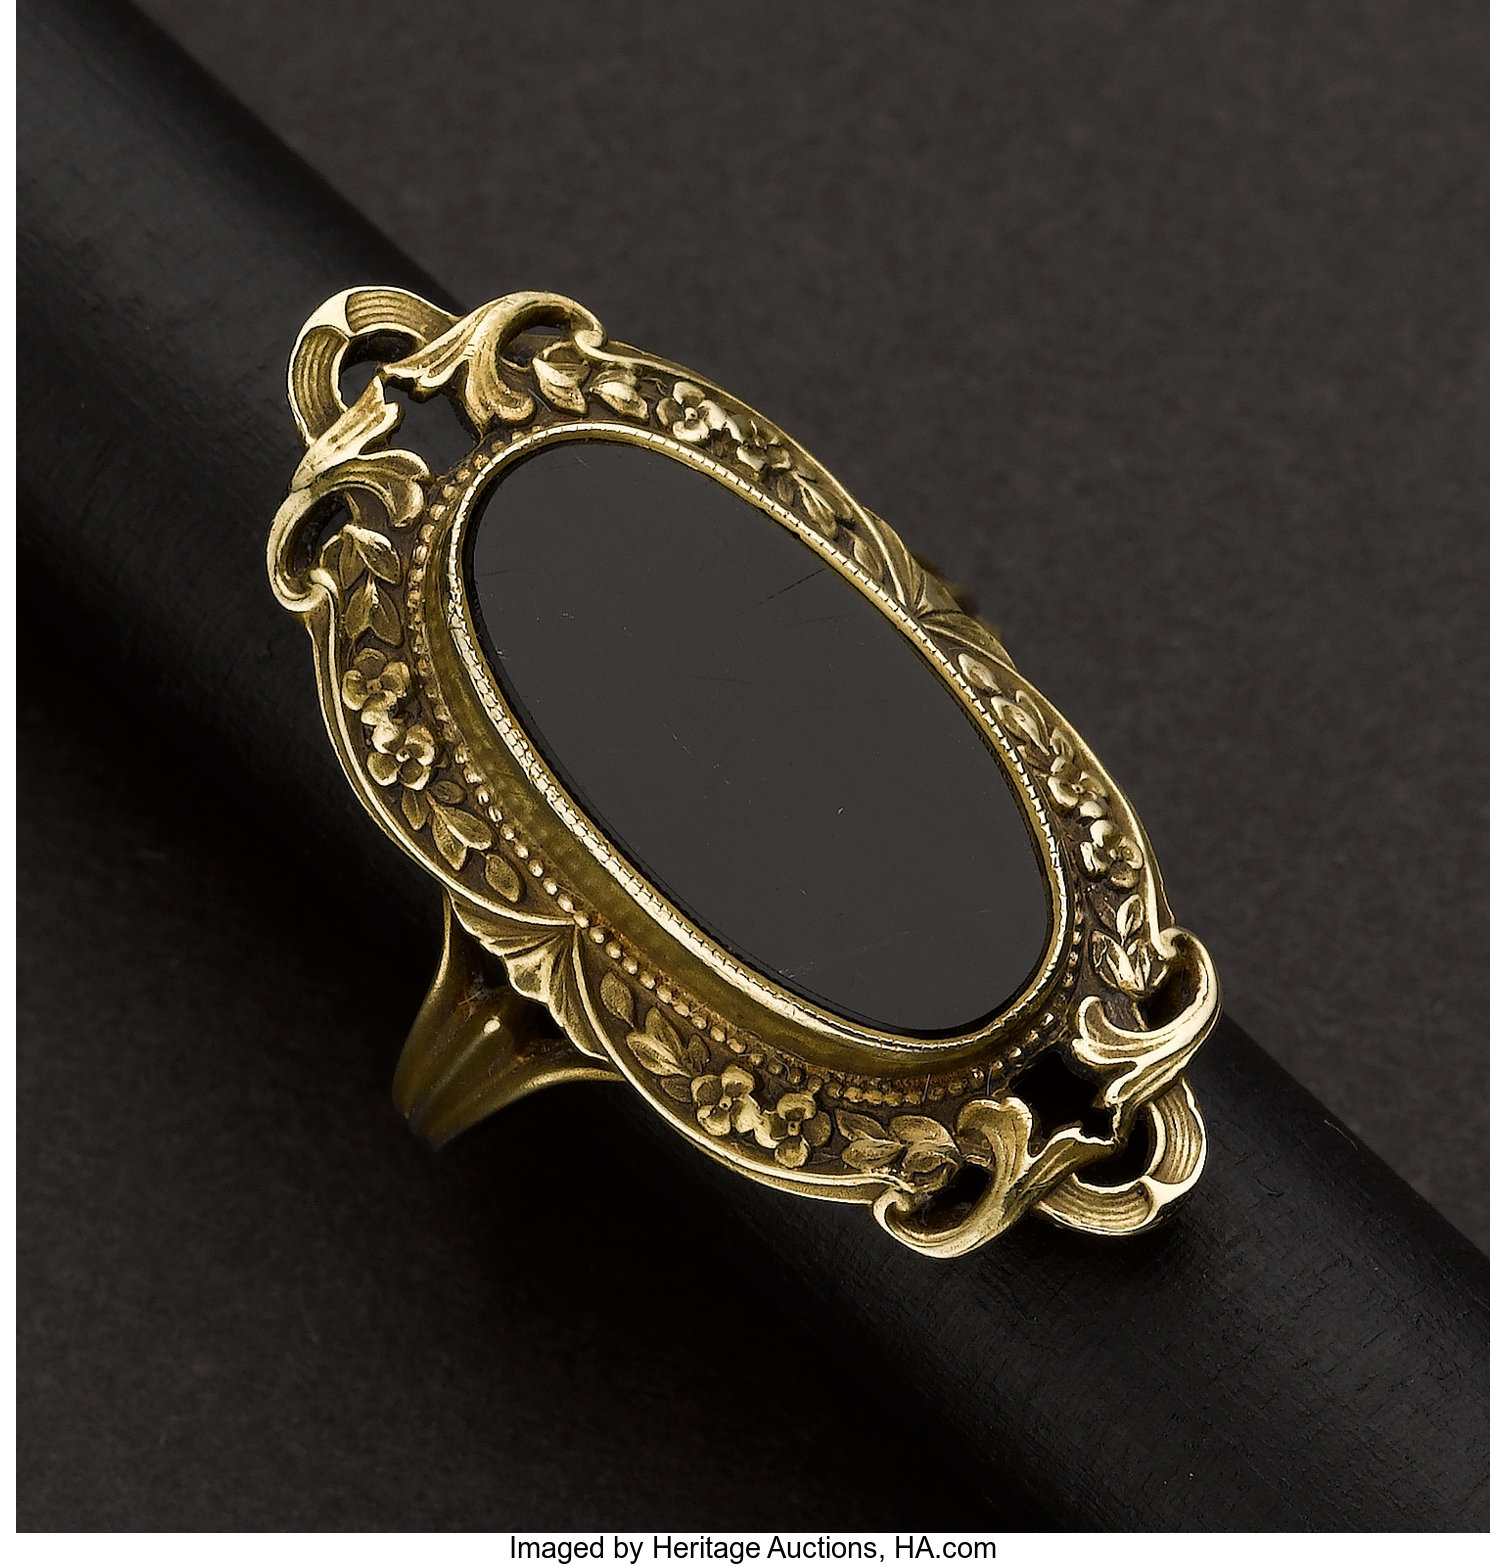 Antique Oval Black Onyx Gold Ring Estate Jewelry Rings Lot Heritage Auctions